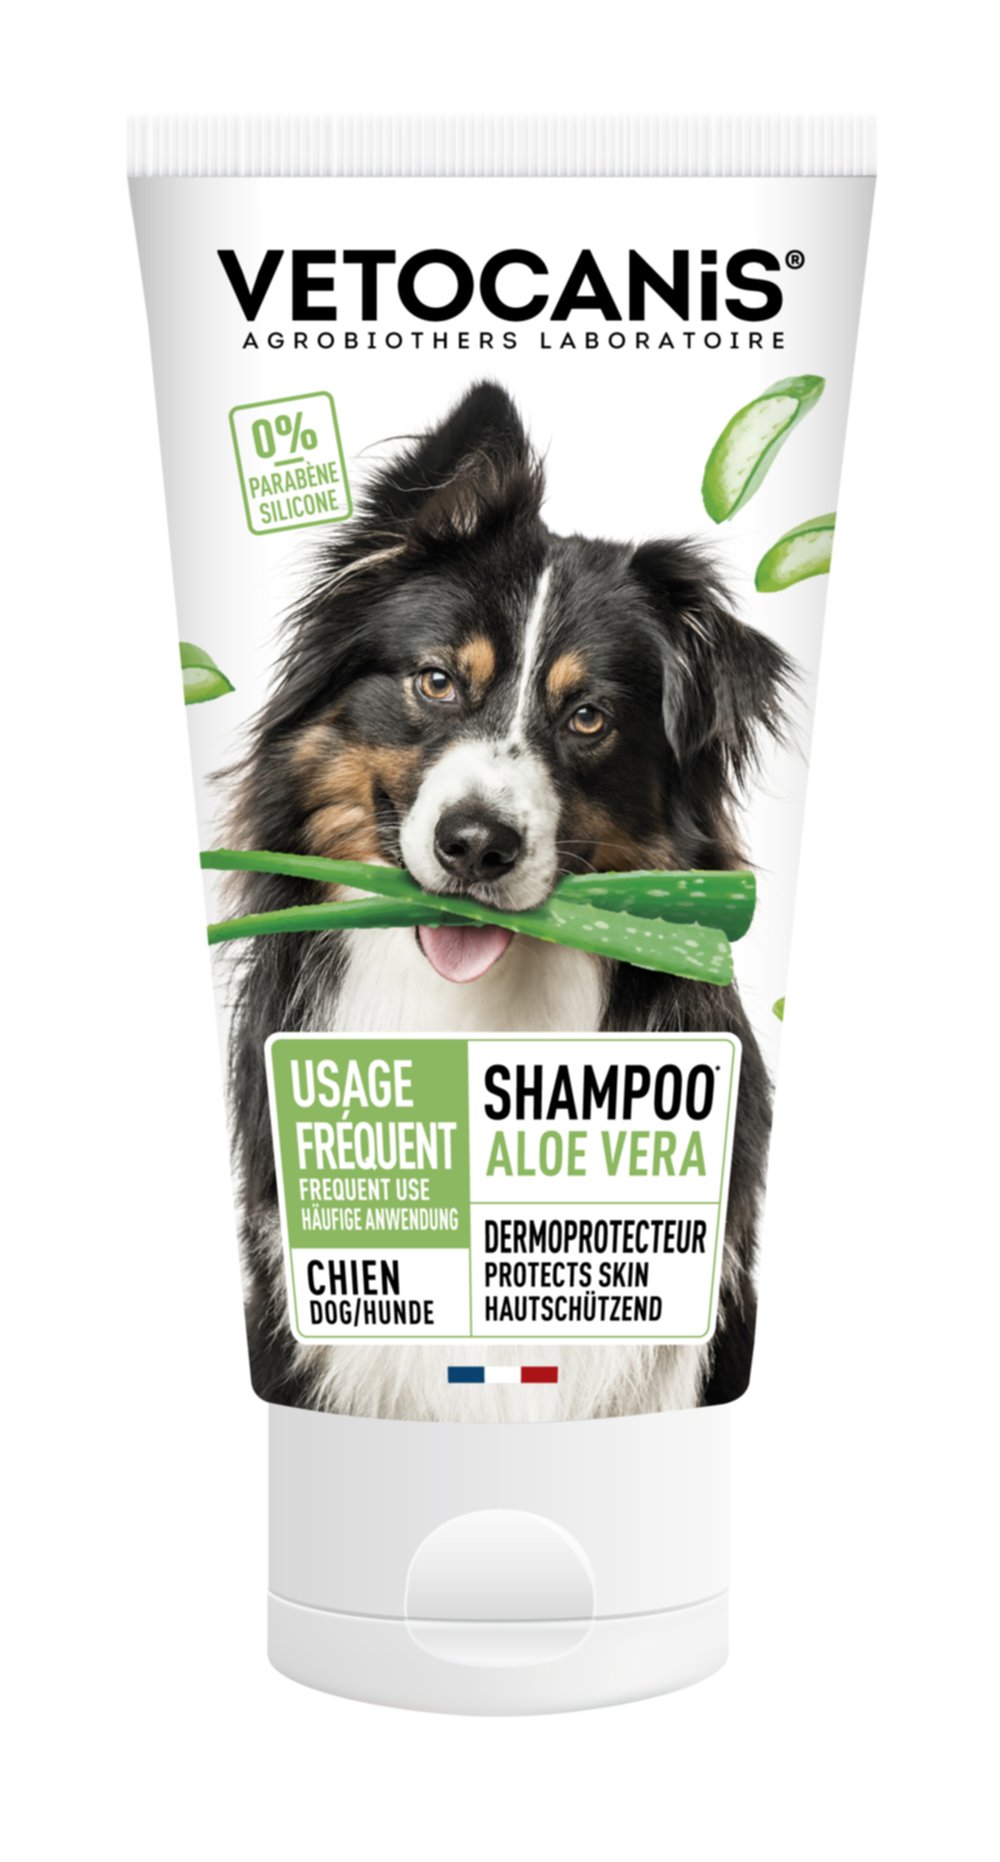 Vc shampoing usage fréquent 300ml chien